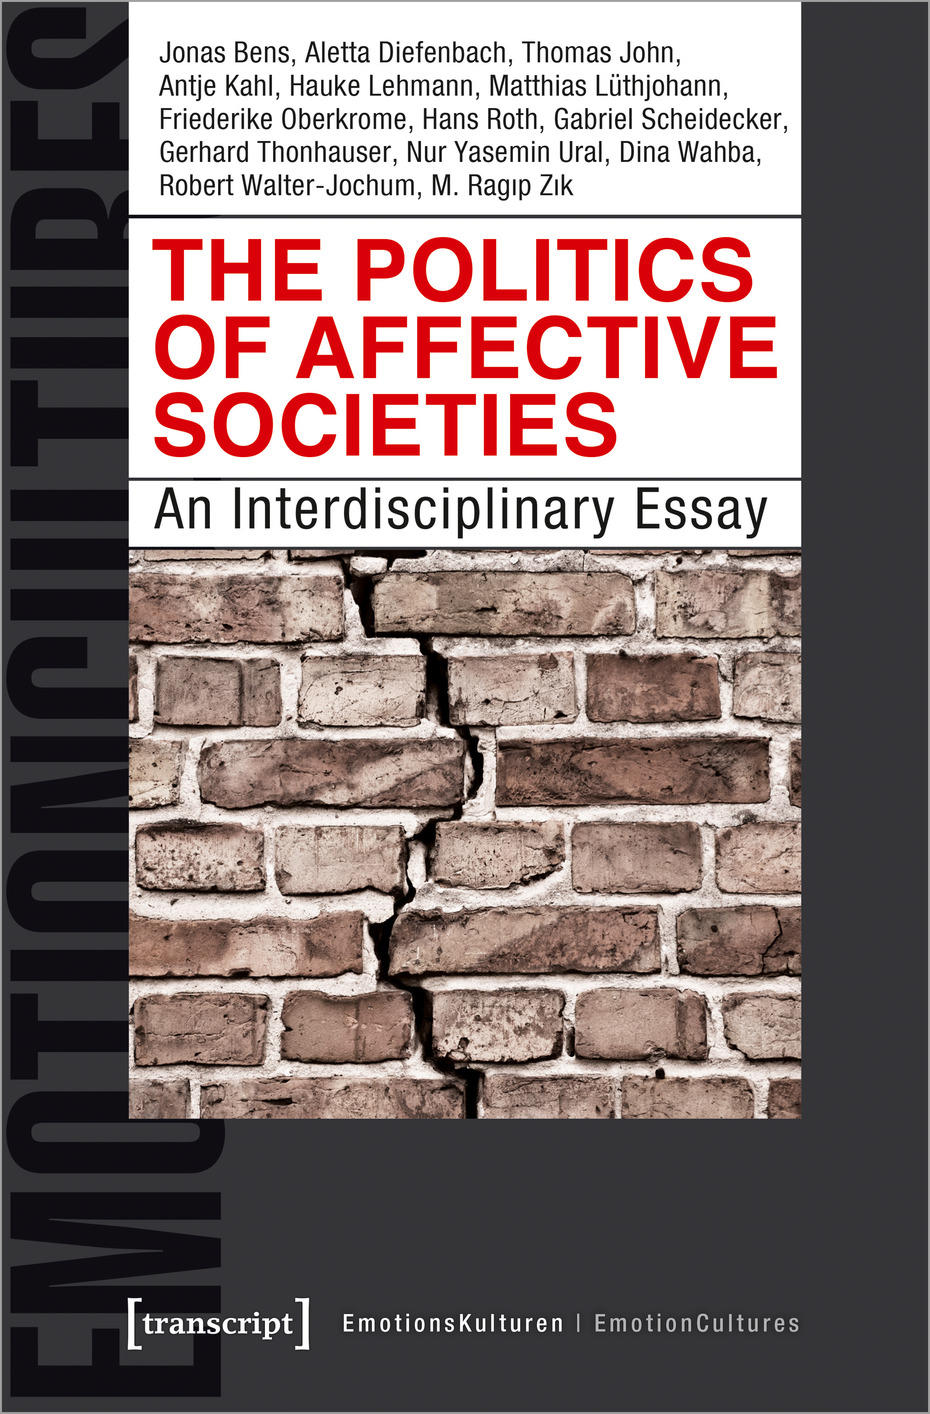 The Politics of Affective Societies (Cover)